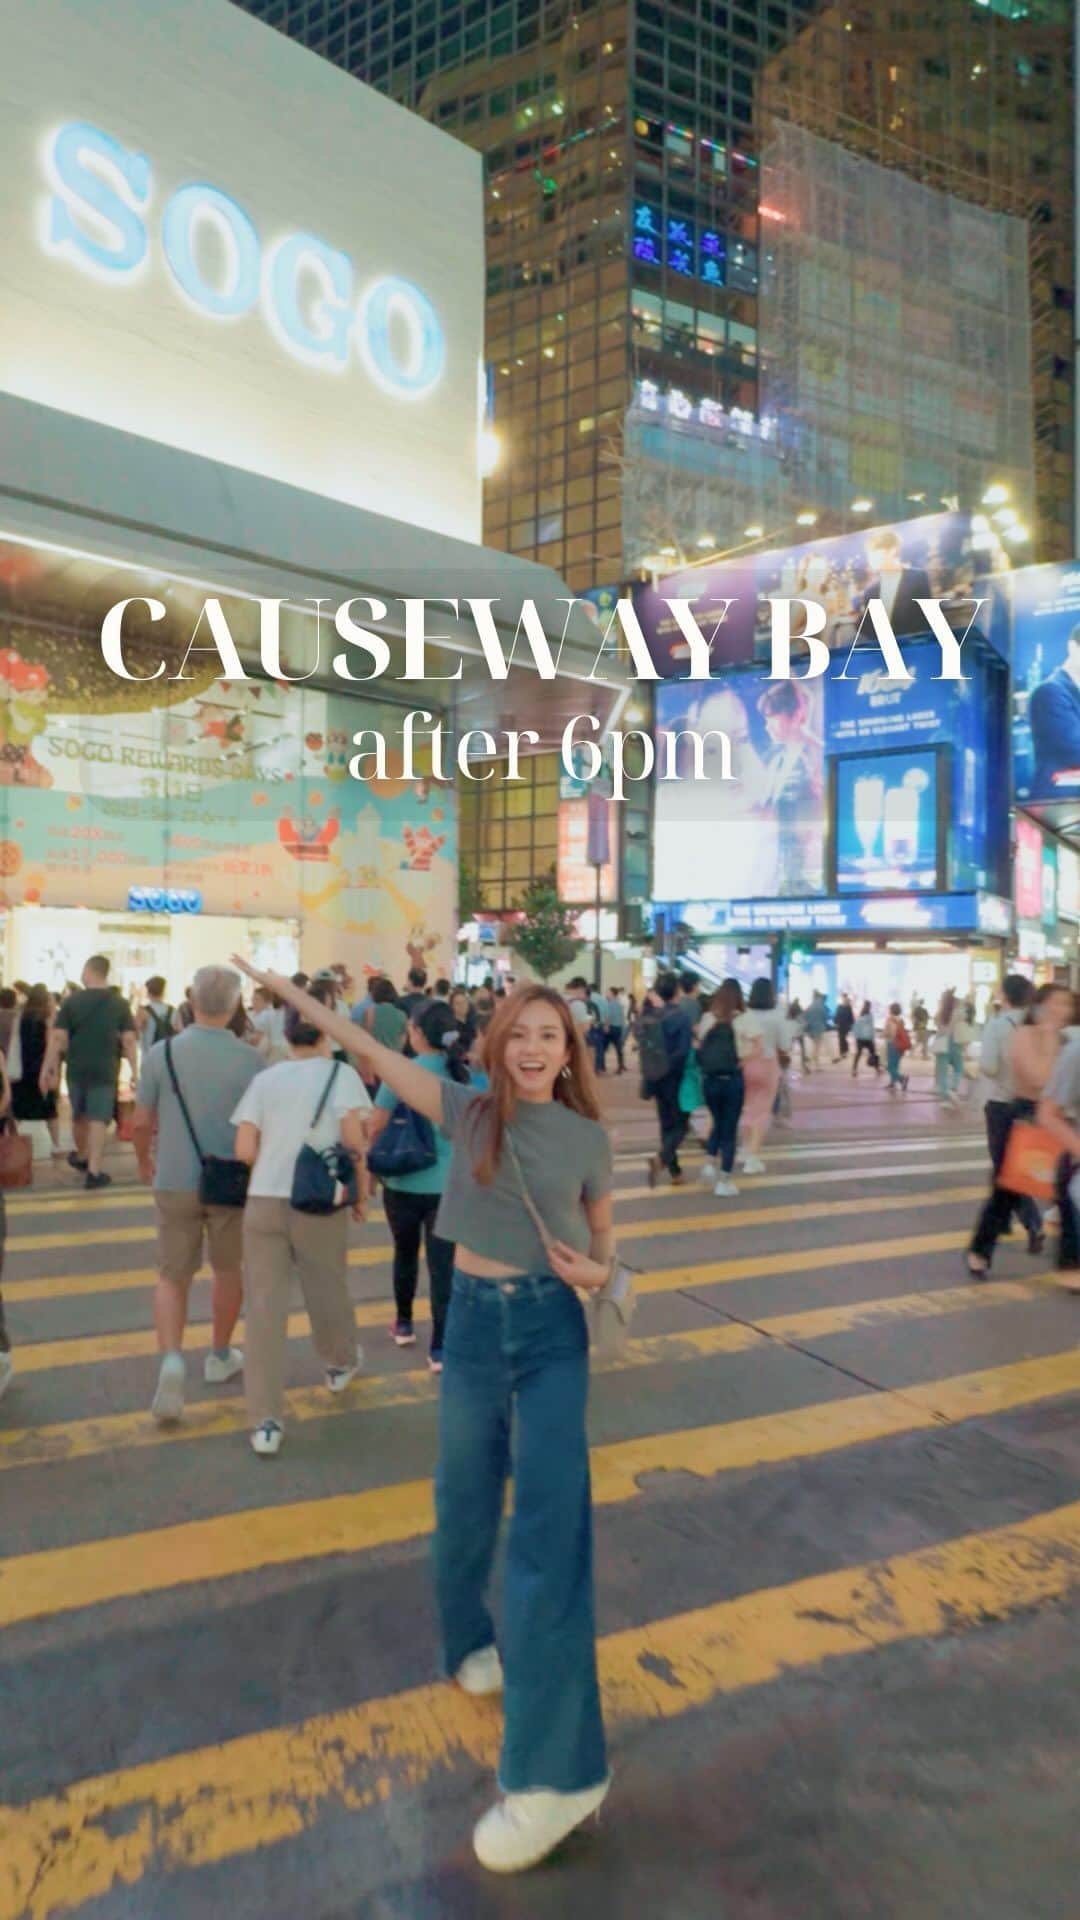 Discover Hong Kongのインスタグラム：「🌃 Dive into the vibrant nightlife of Causeway Bay after 6pm!✨ Beyond shopping at the bustling malls, experience the exhilarating horse-racing carnival at Happy Valley 🏇 and savour the mouthwatering HK-style desserts to cap off the perfect night out with friends! 🍨  🌃 投入銅鑼灣「夜繽紛」氣氛，夜晚6點後嘅依然充滿活力✨。 除咗喺人潮如鯽嘅商場、潮流集中地白沙道shopping以外，仲可以去跑馬地馬場體驗刺激嘅Happy Wednesday 賽馬盛事 🏇。入夜後唔好咁快走住，仲可以約埋一班friend品嚐地道嘅港式甜點，為完美嘅夜晚劃上句號！🍨  #CausewayBayAfter6 #HongKongAfter6 #HelloHongKong #DiscoverHongKong #HelloTakesYouToMore  🌃✨🌃✨🌃✨🌃✨🌃✨🌃✨🌃✨🌃✨🌃✨ What else can you do at night in Hong Kong?🌃 Stay tuned for our #HongKongAfter6 !👀 想知嚟緊夜晚有乜玩？🌃記得跟貼我哋嘅 #HongKongAfter6 ，更多節日盛事、玩樂好去處等緊你！👀」